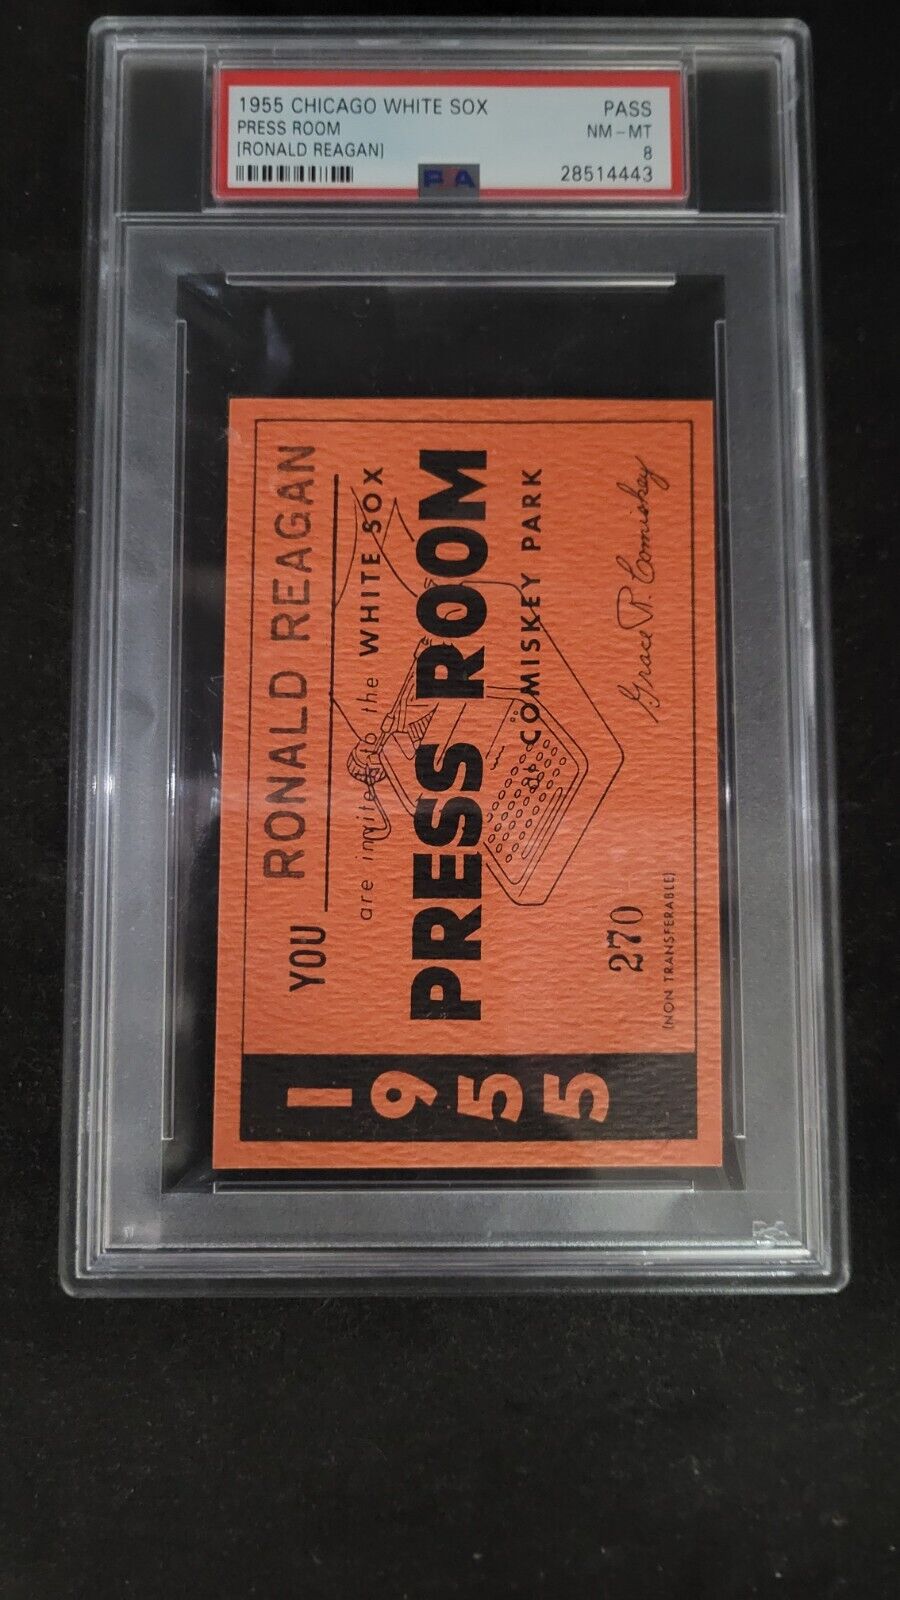 President Ronald Reagan 1955 Press Pass for Chicago White Sox PSA Authentic @10A